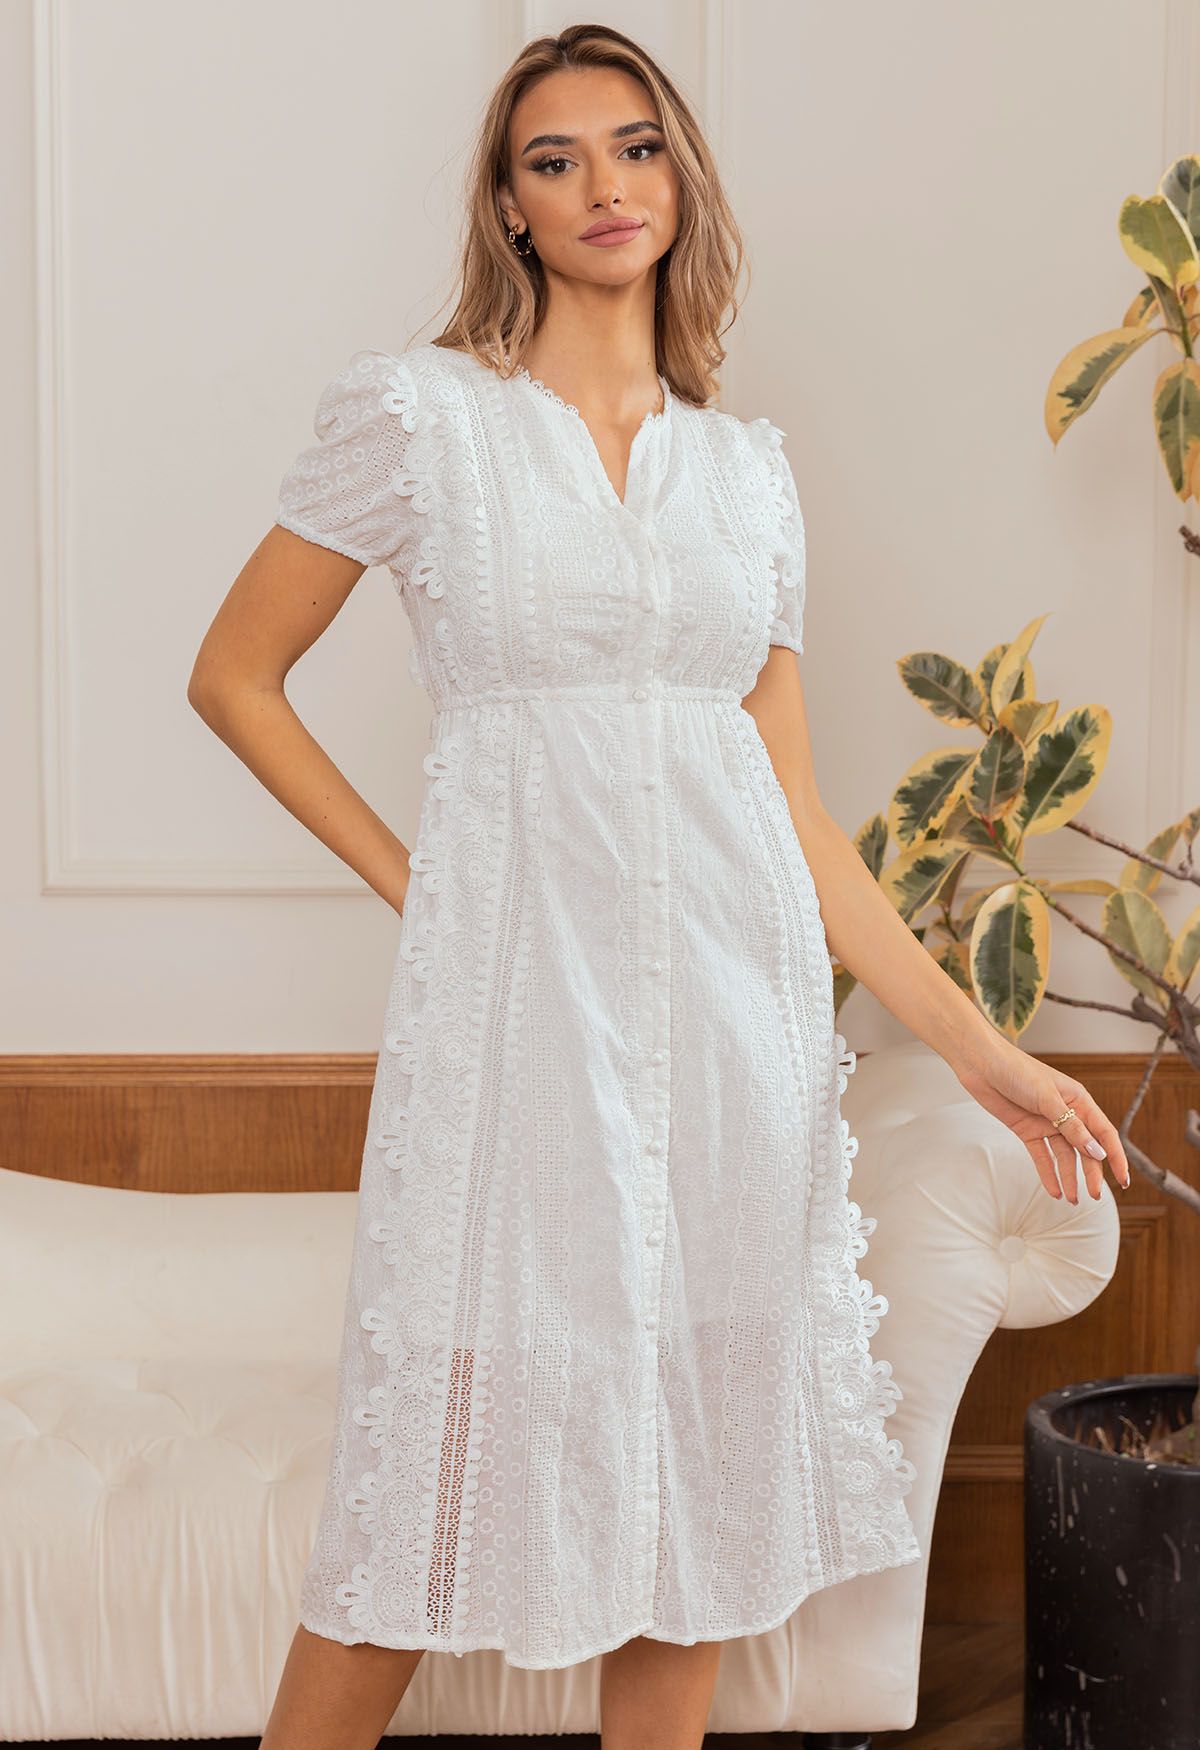 Eyelet Embroidered Cutwork Lace Trim Button Down Dress